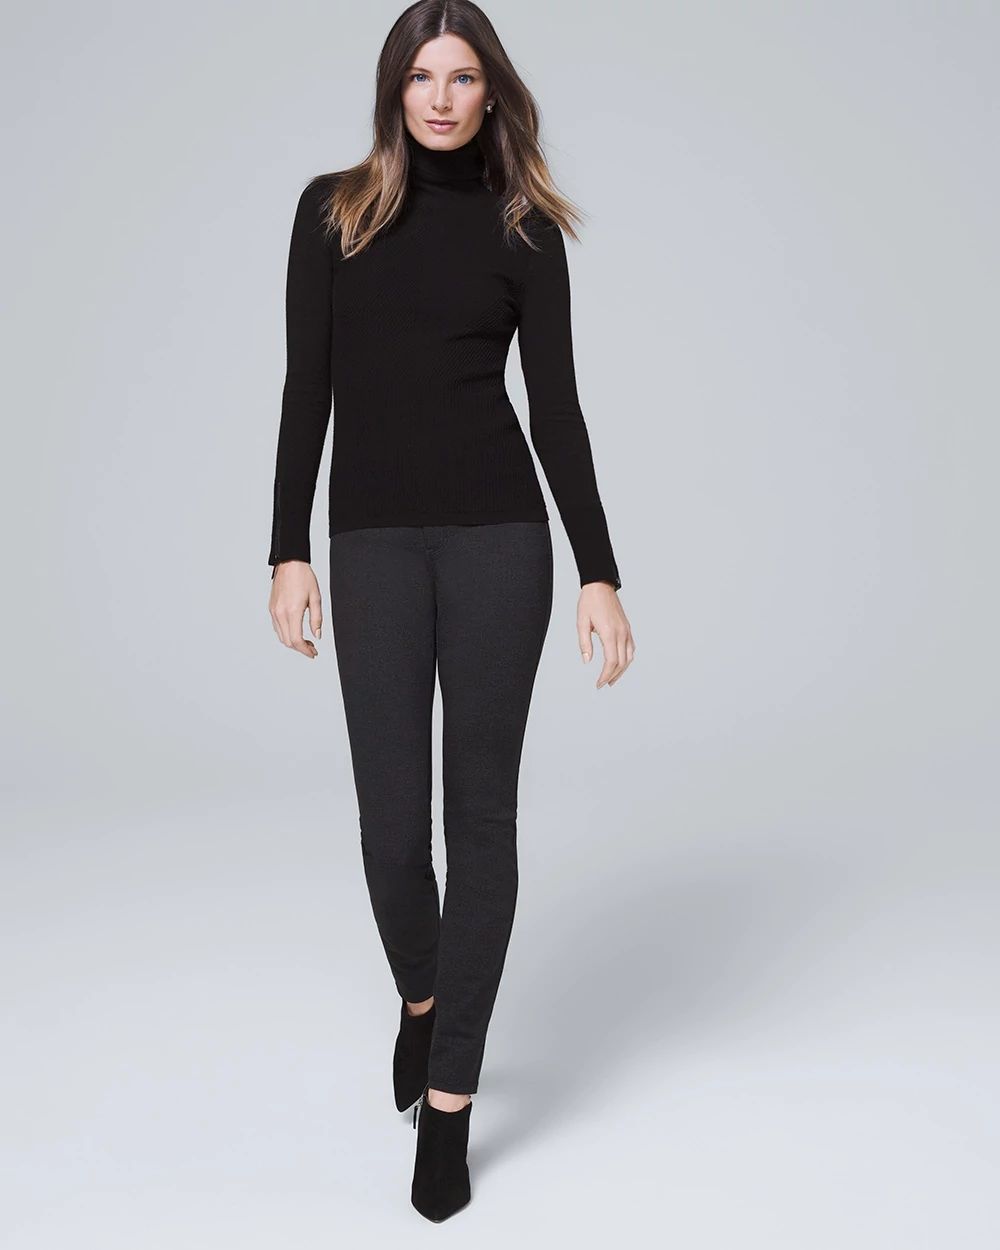 Effortless High-Rise Skinny Ankle Pants with Top Secret Slimming Pockets click to view larger image.